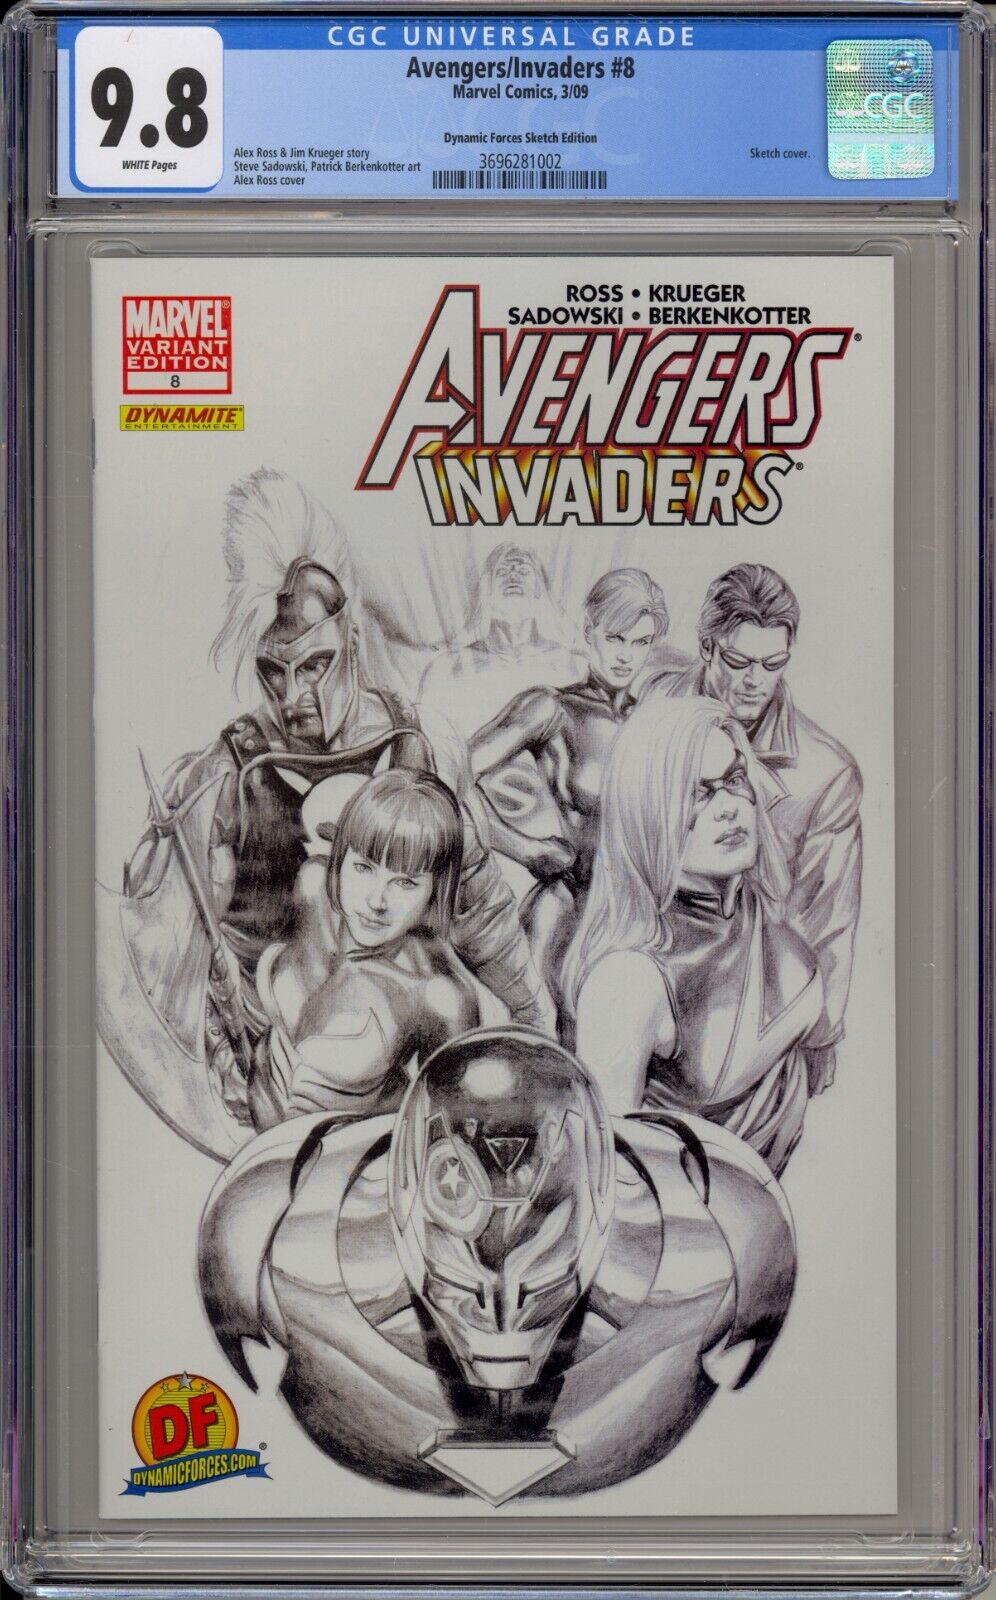 AVENGERS/INVADERS #8 - CGC 9.8 -ALEX ROSS DYNAMIC FORCES SKETCH VARIANT WITH COA